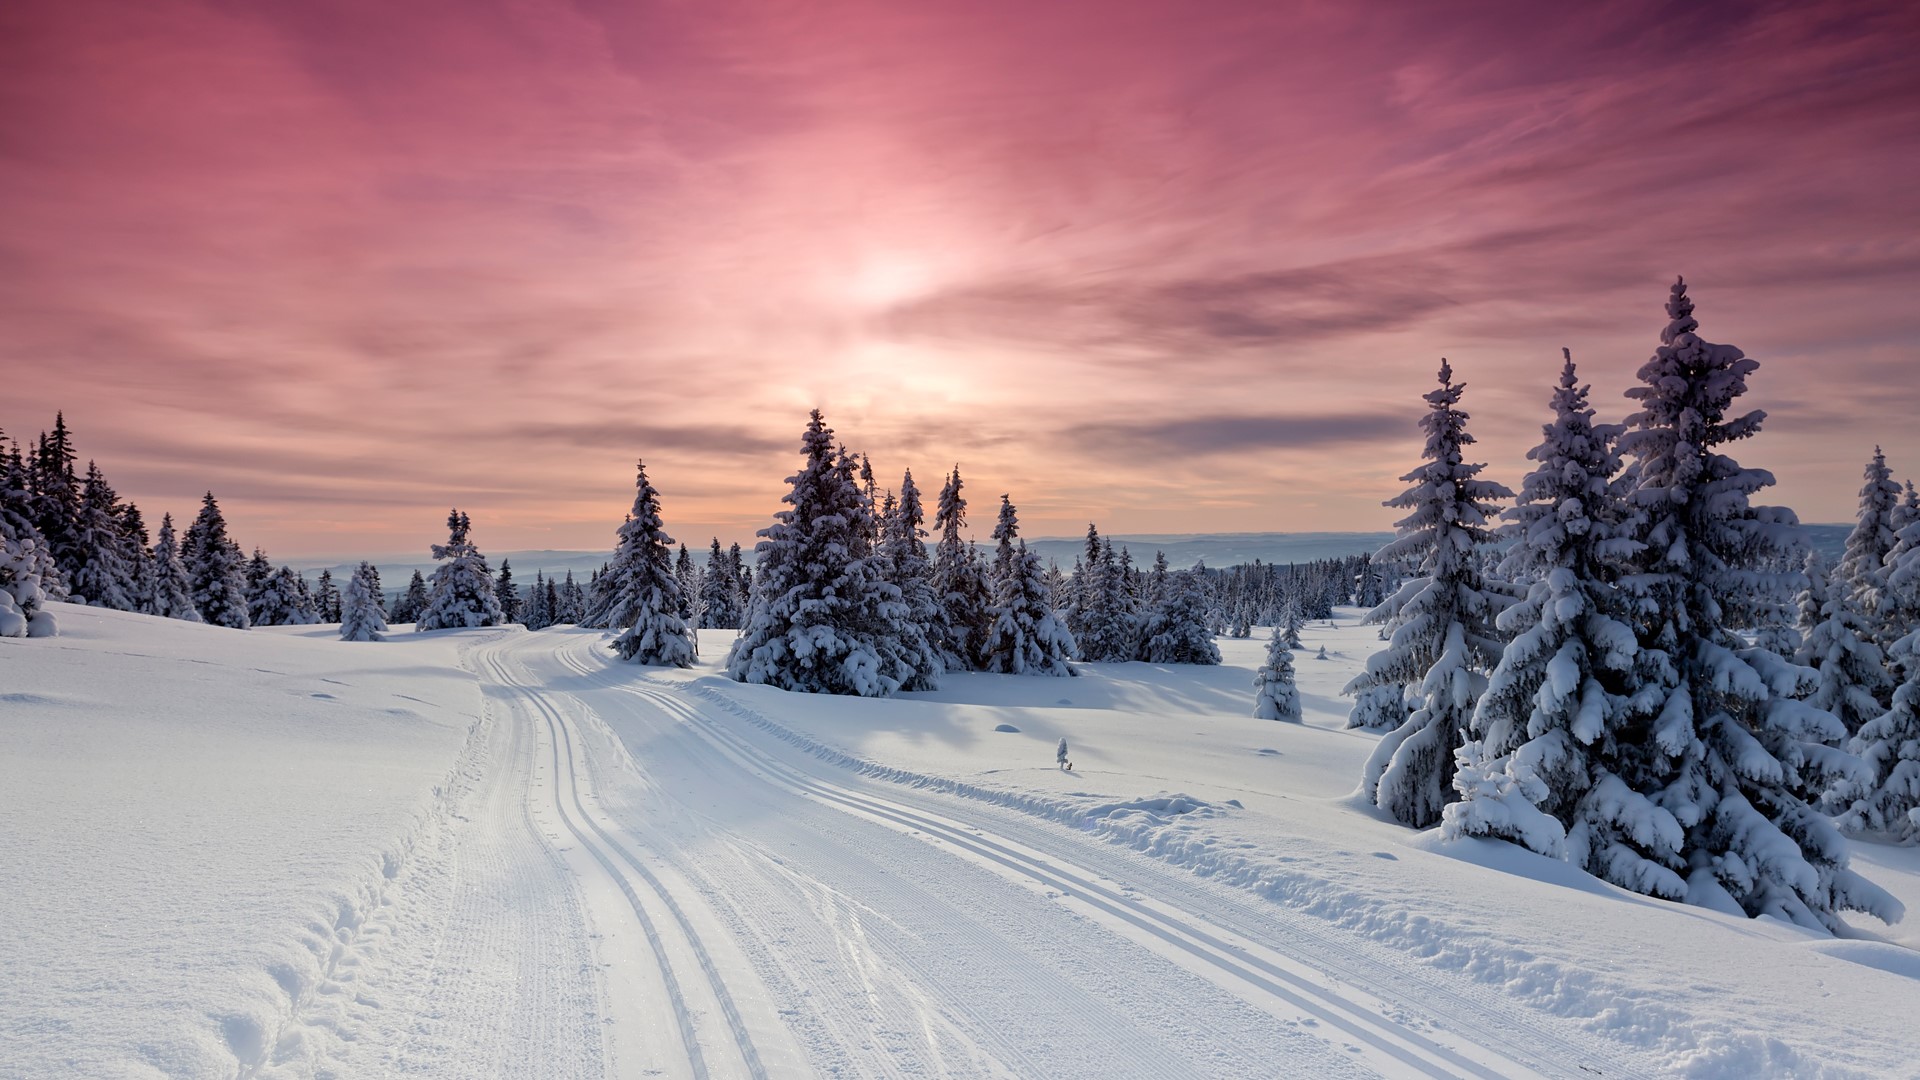 General 1920x1080 landscape nature sky clouds trees forest snow mountains snow tracks winter plants sunset Norway